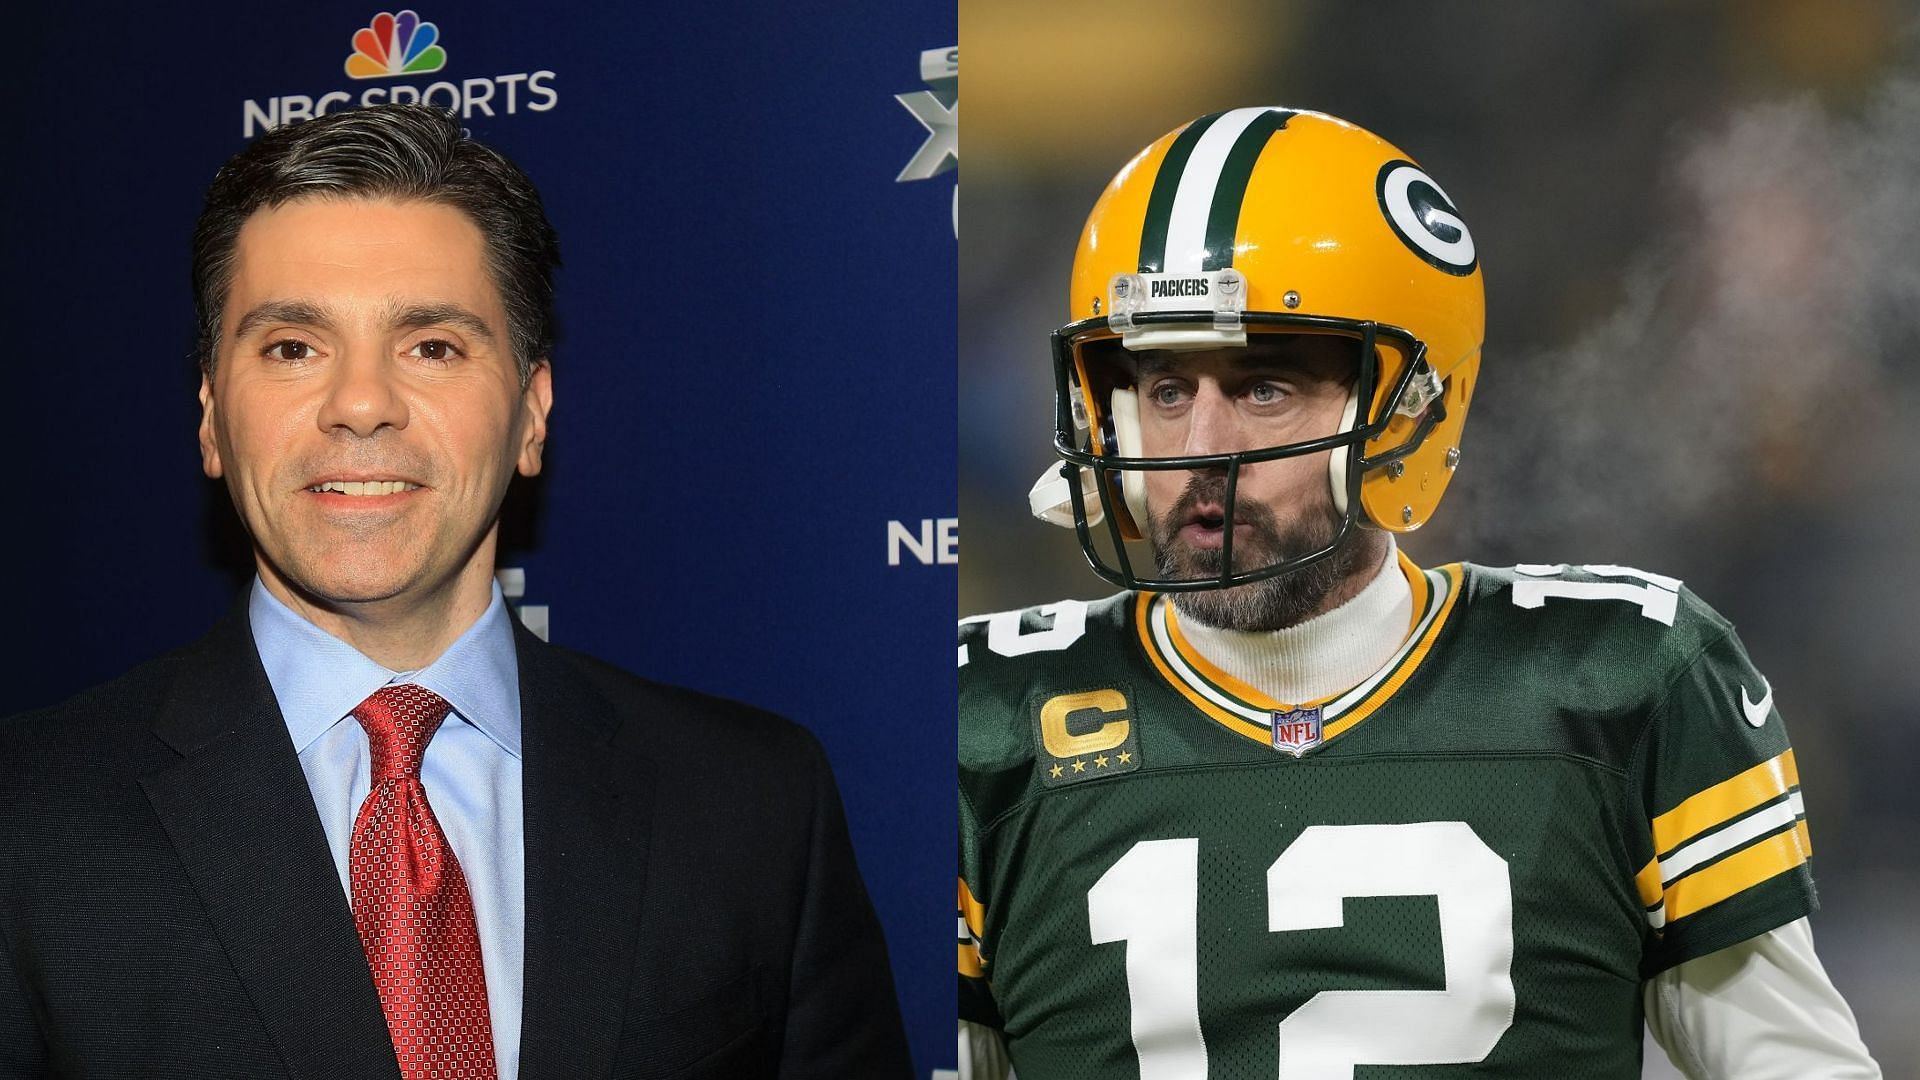 Florio has given Aaron Rodgers a warning over the Jets